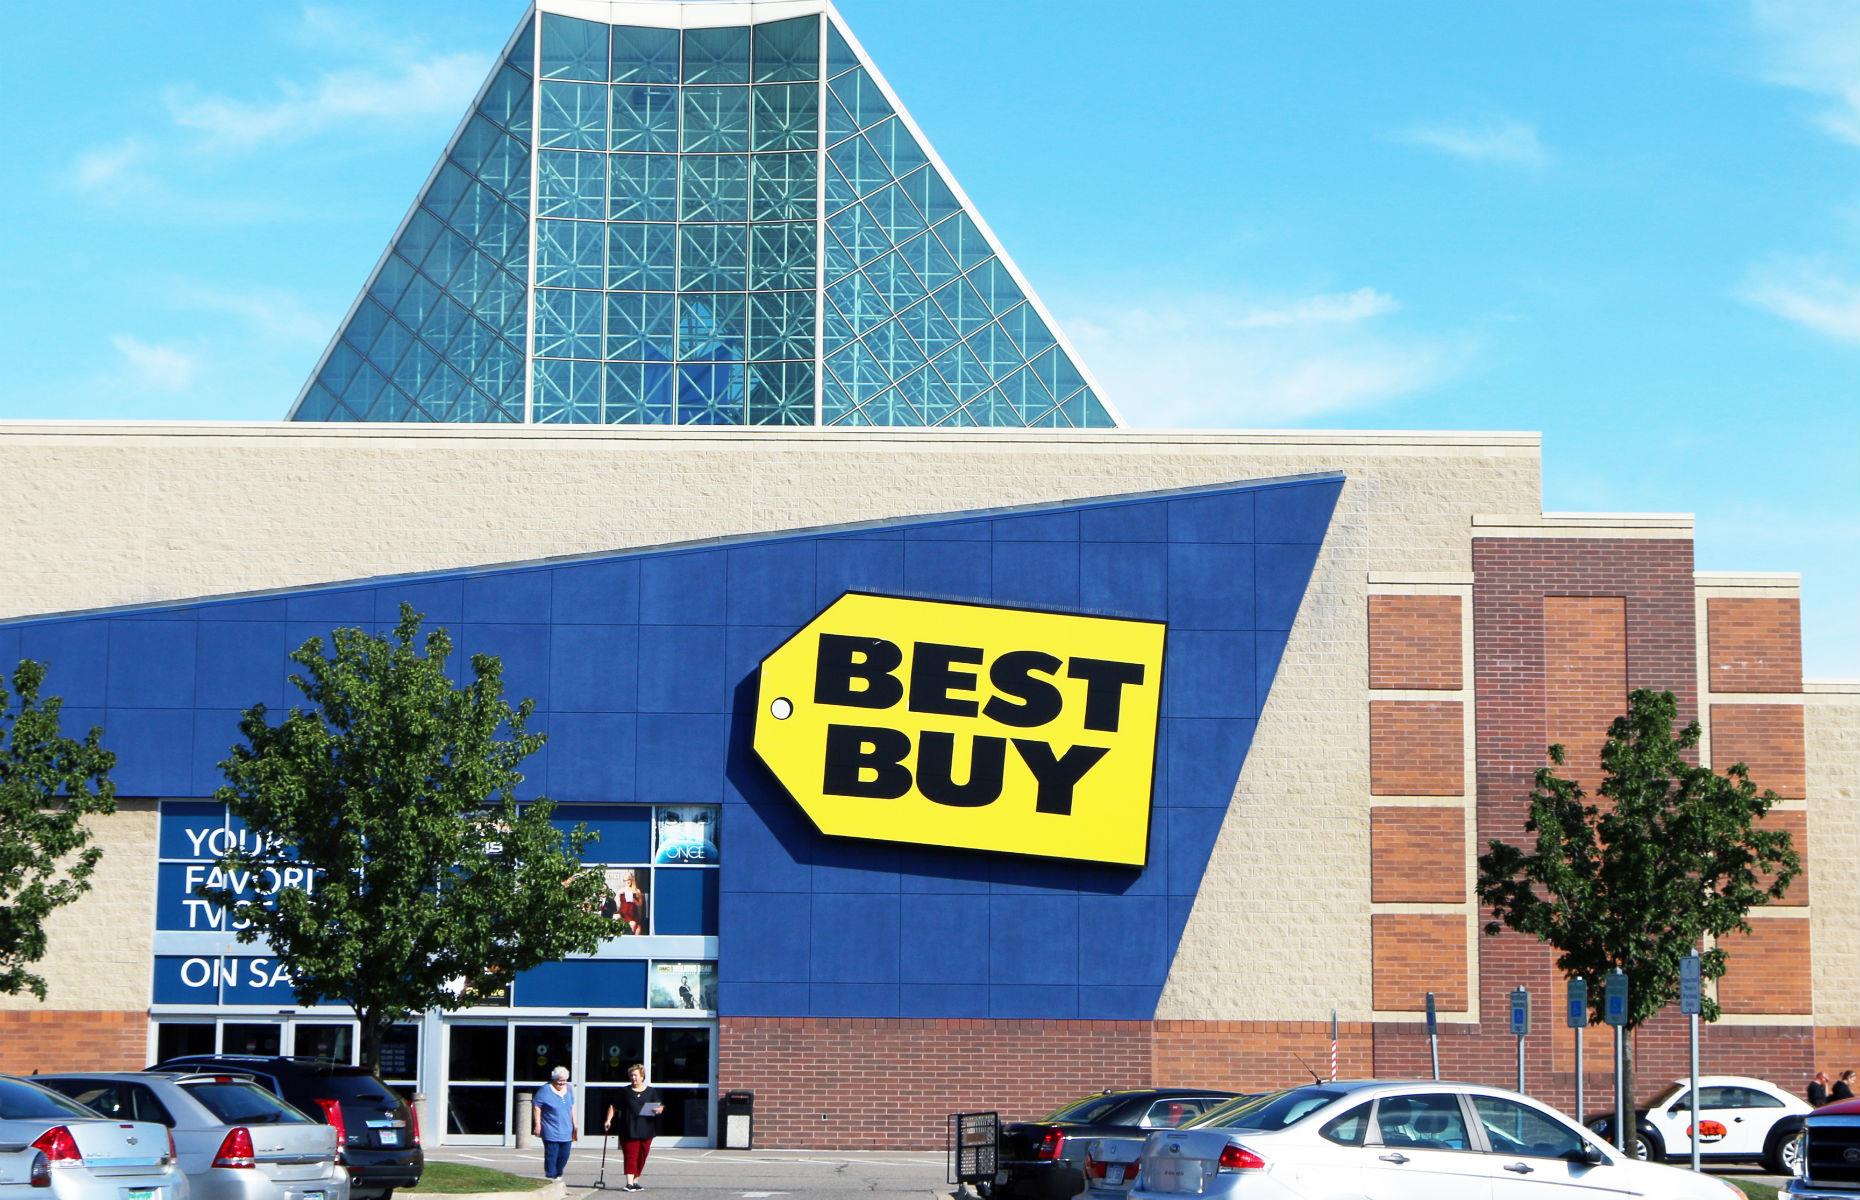 Best Buy, formerly Sound of Music